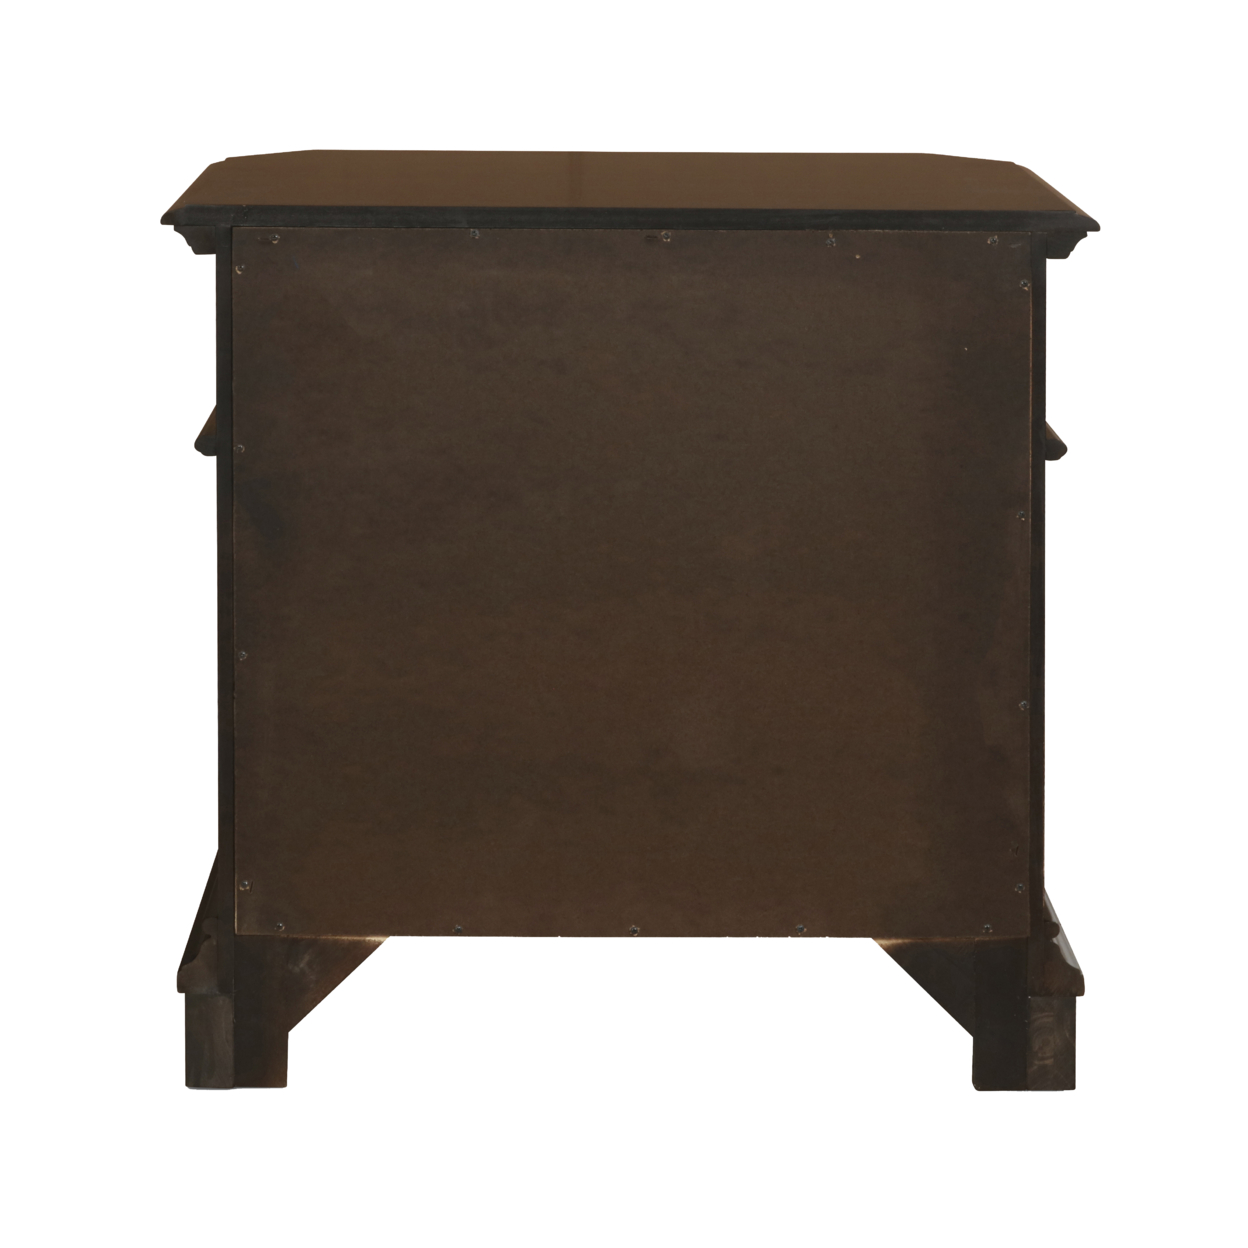 3 Drawer Wooden Nightstand With Molded Details And Metal Pulls, Brown- Saltoro Sherpi